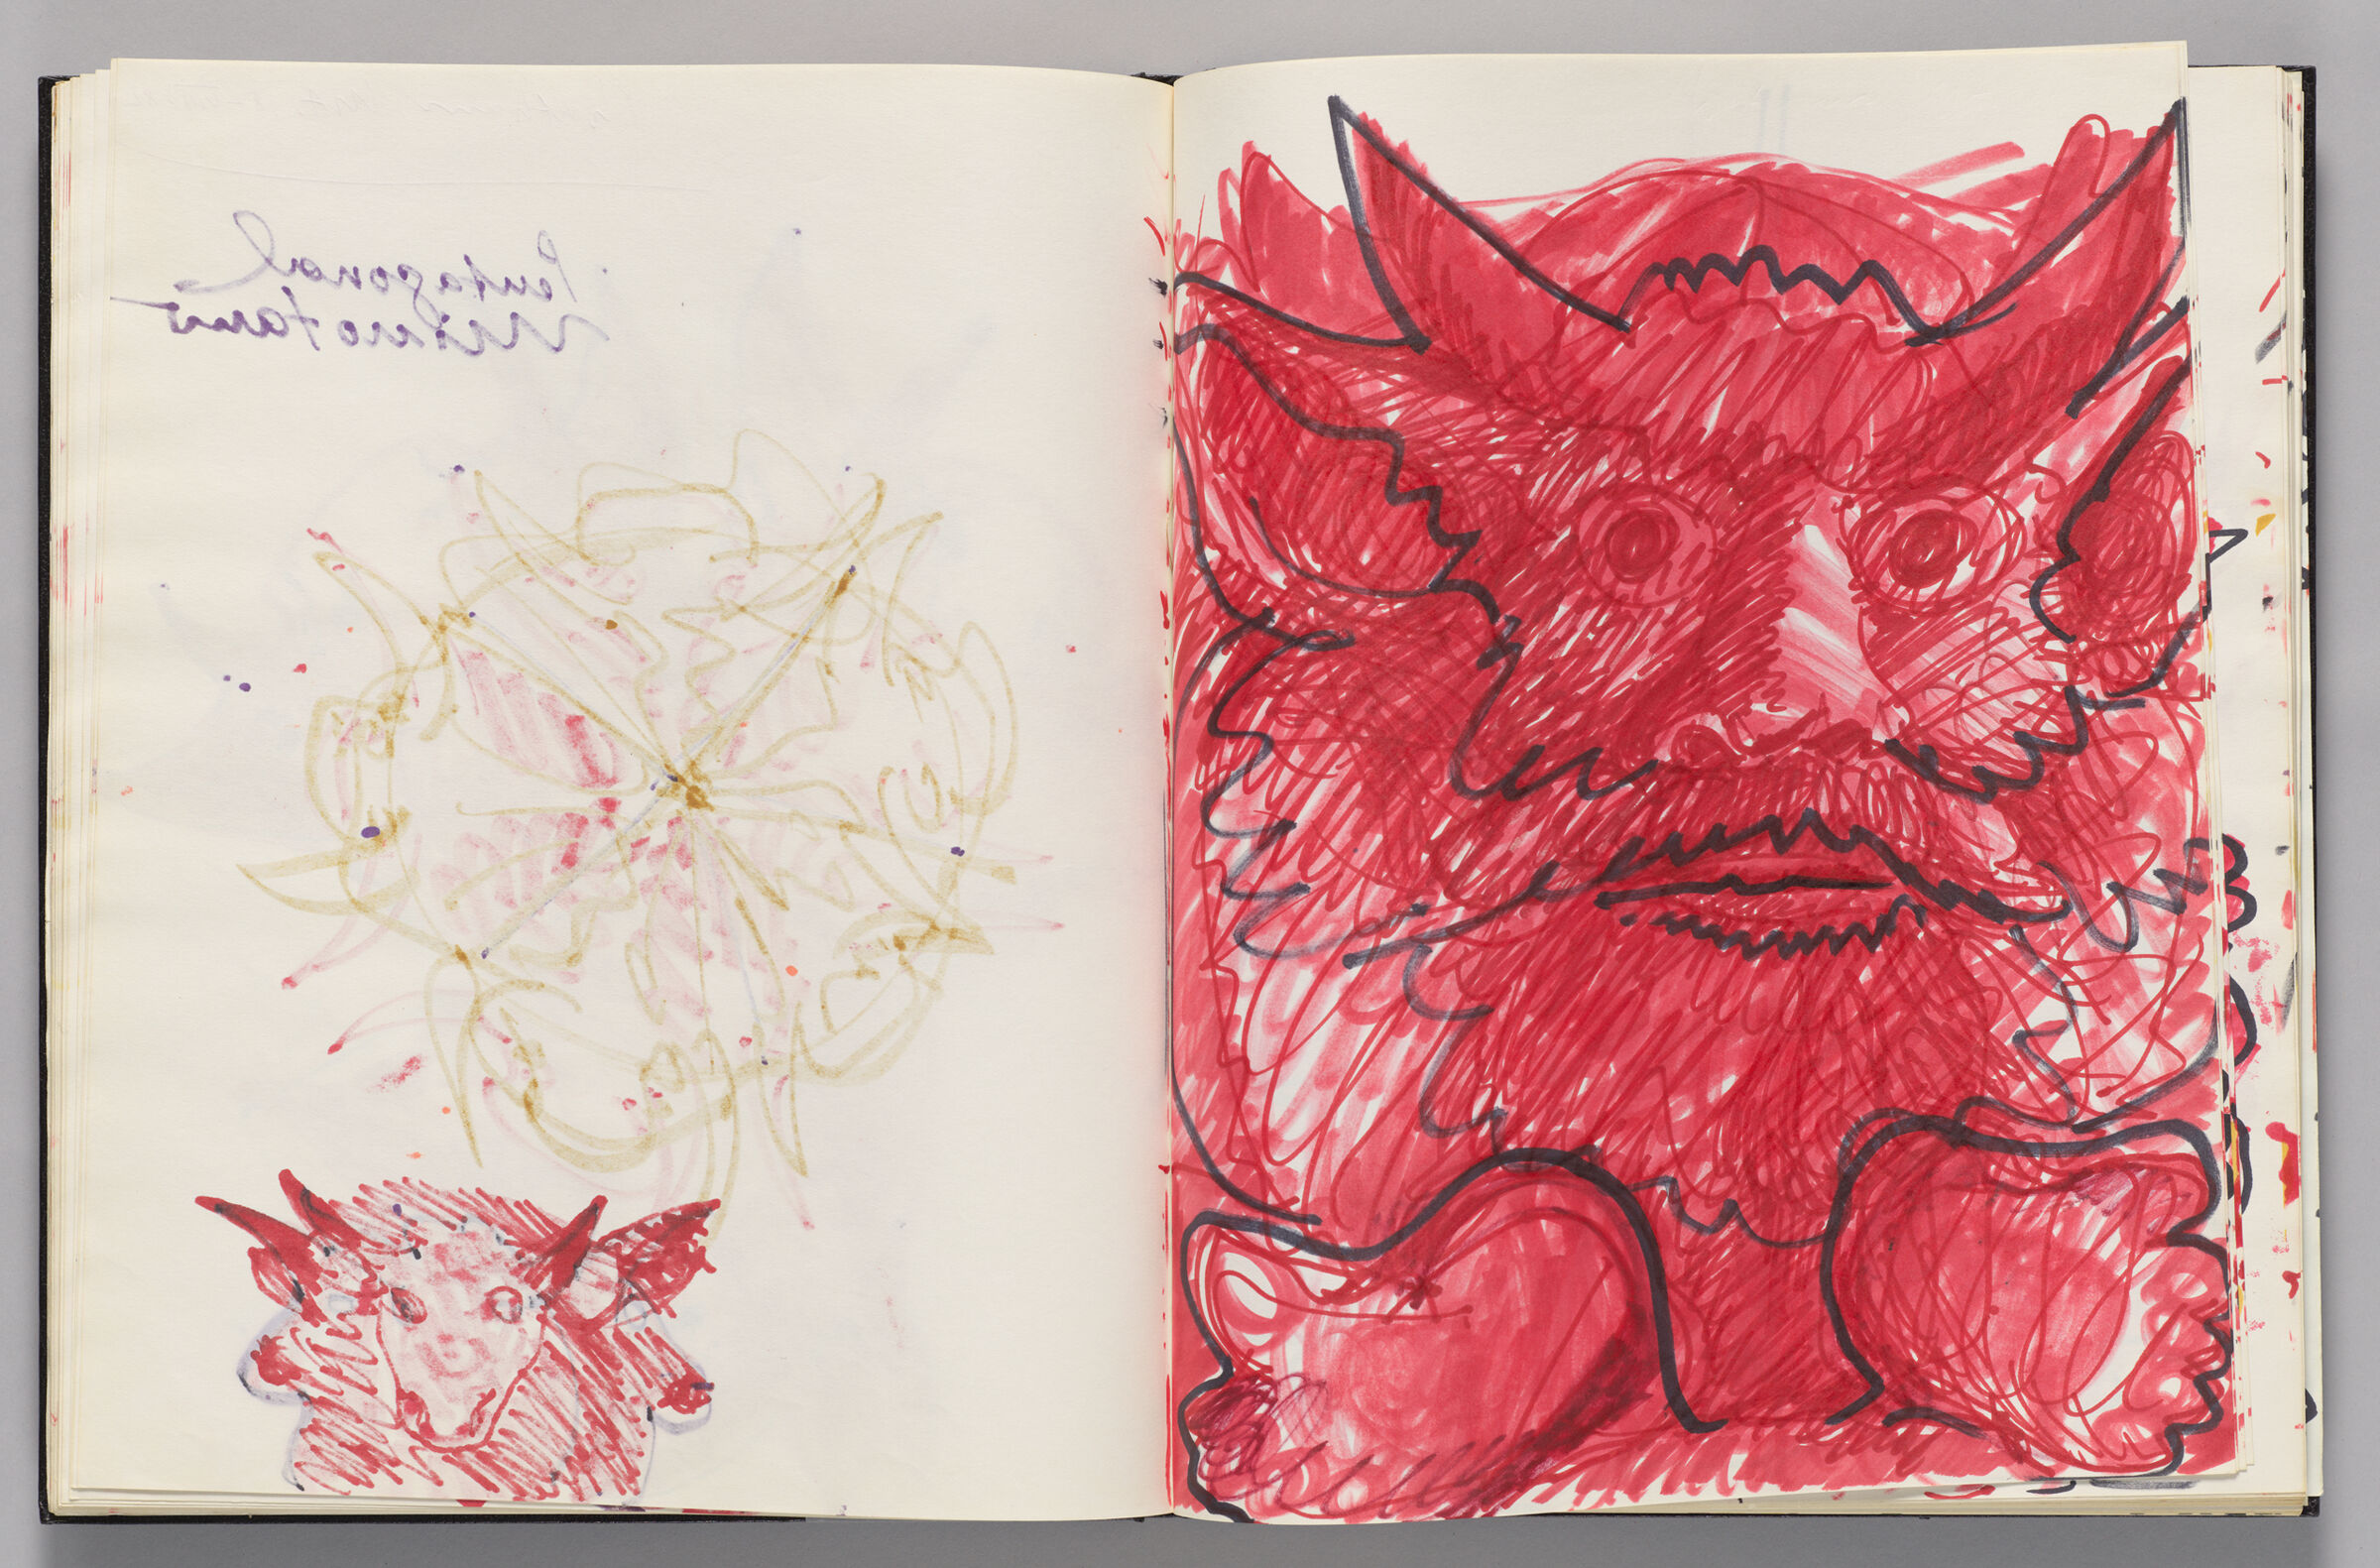 Untitled (Bleed-Through Of Previous Page, Left Page); Untitled (Close-Up Of Minotaurs In Red And Black, Right Page)